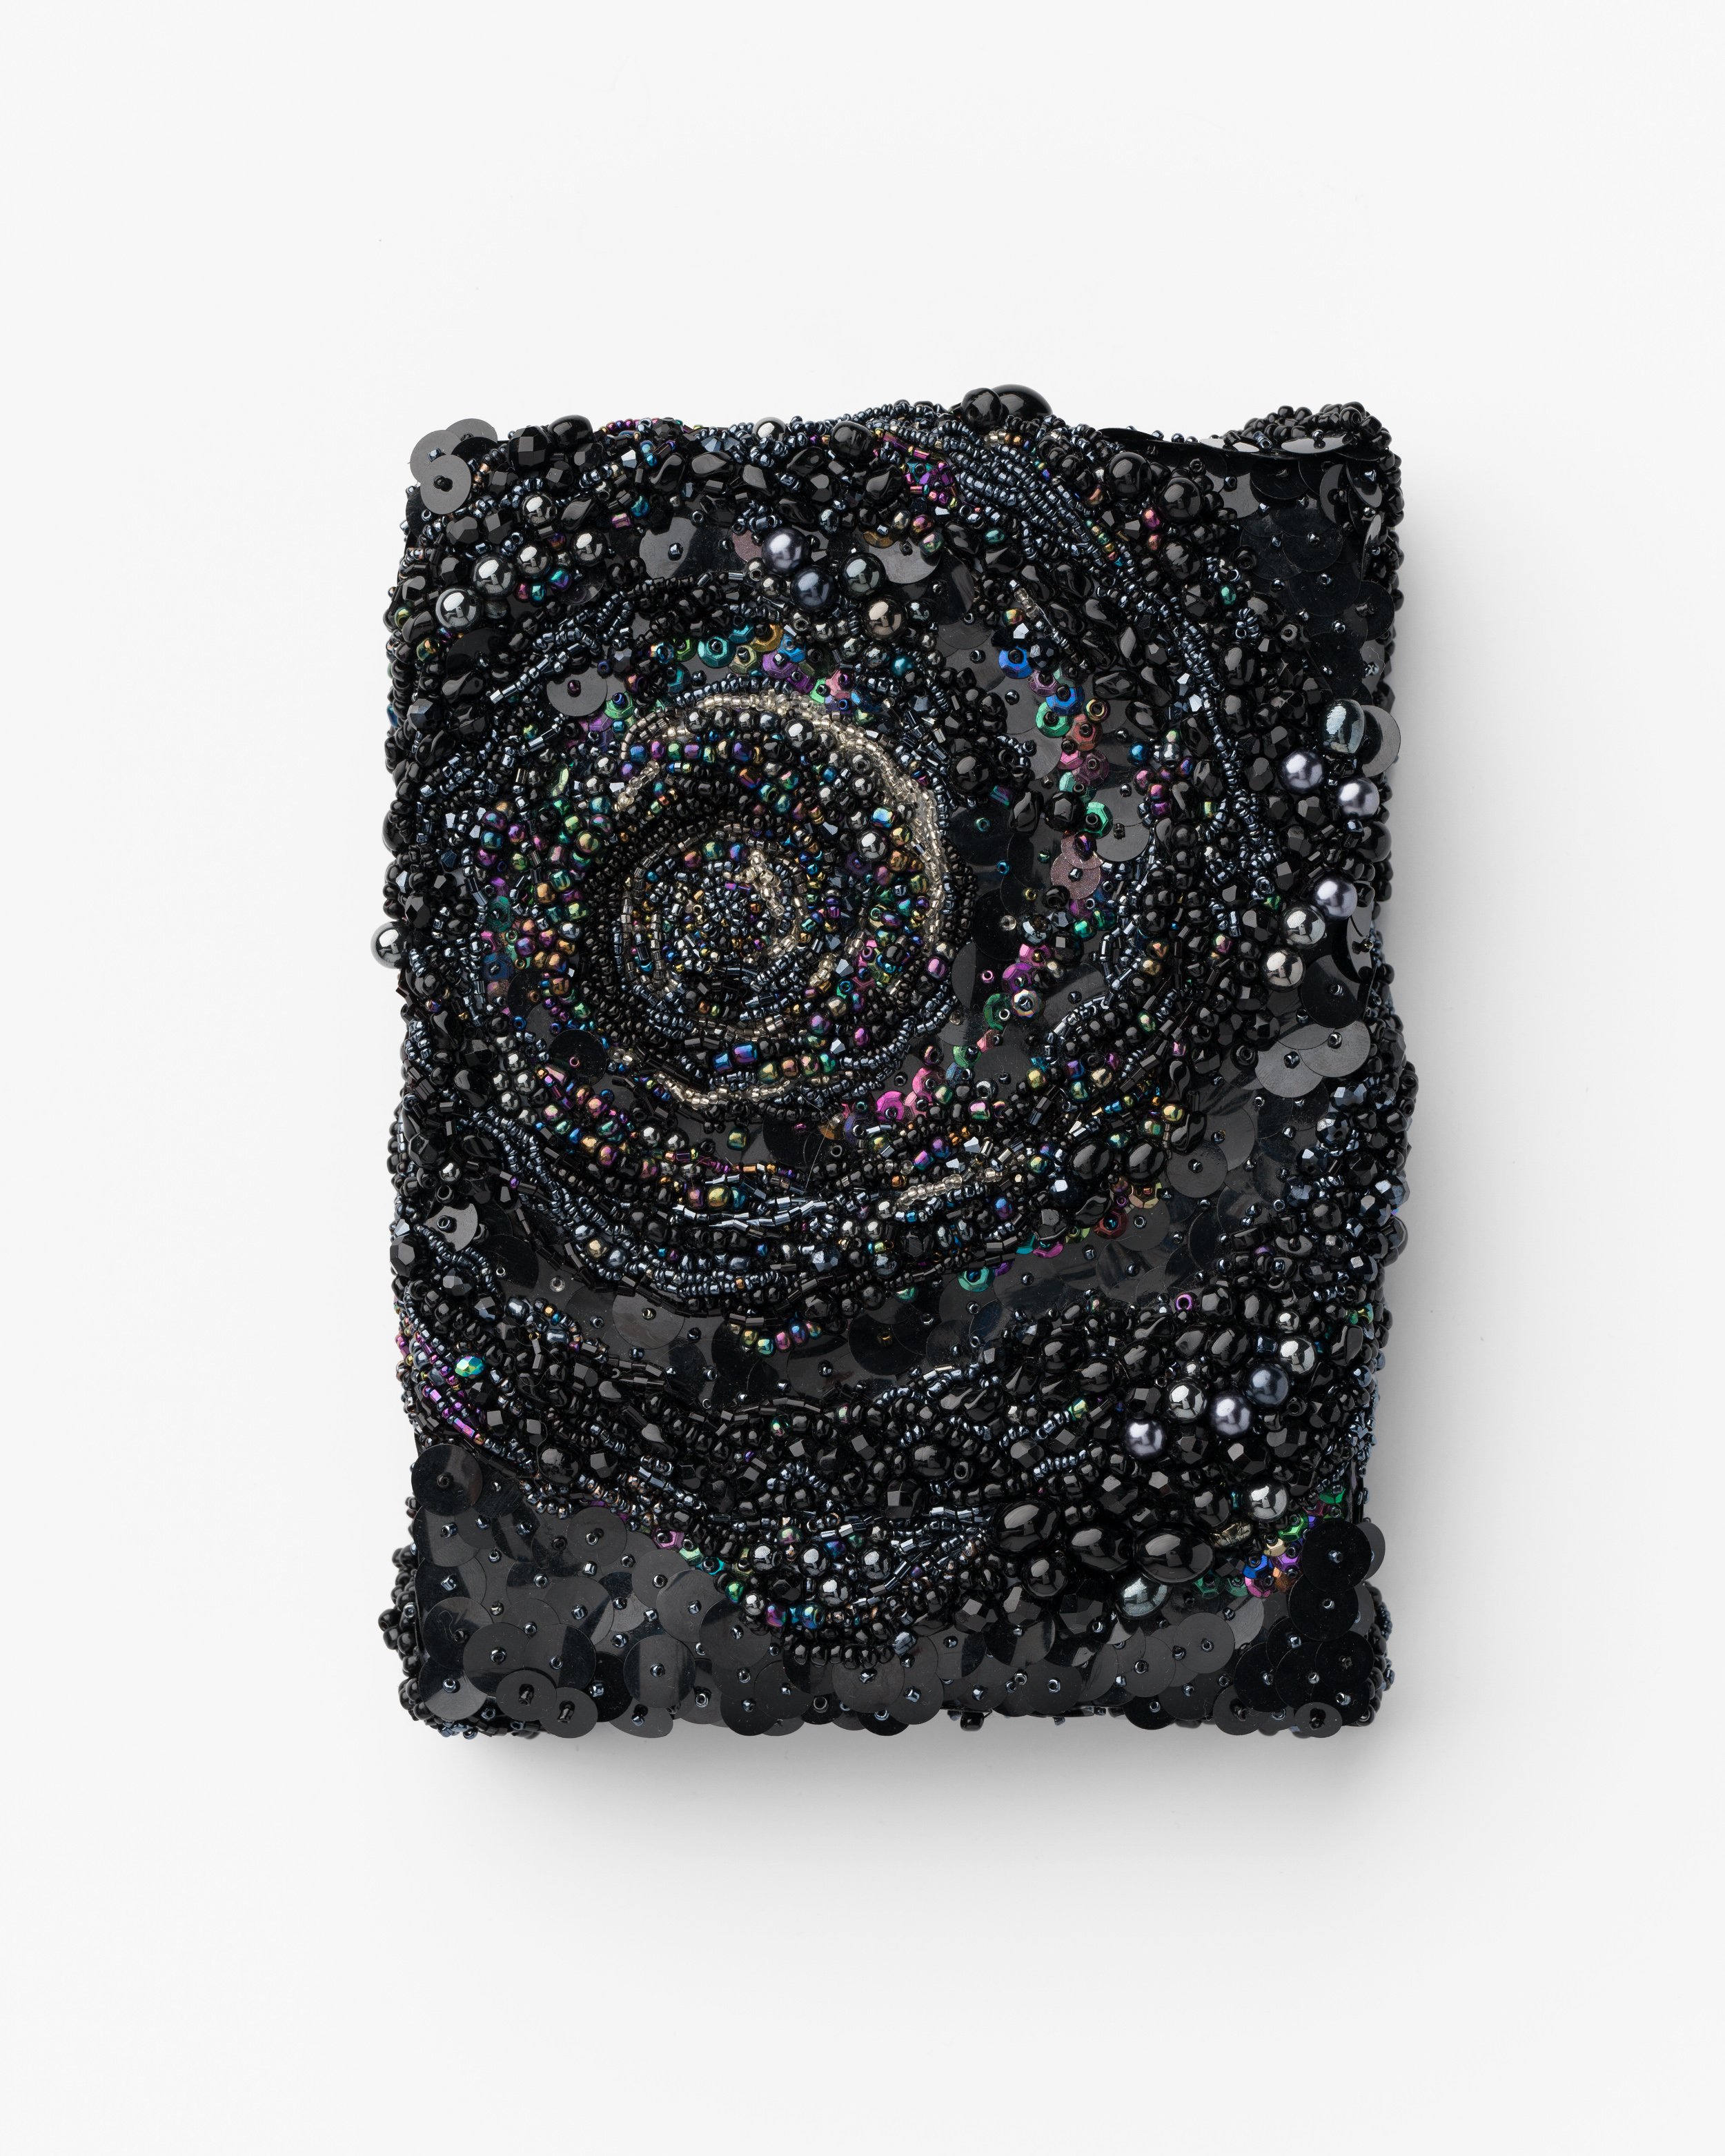   A moment eternal, no. 6 (black spiral)    2020-2021   Beading of vintage and antique glass, plastic, pearls, swarovski crystal, hematite, jet, polyester thread, on synthetic fabric over canvas  20cm x 16cm x 3cm  Photography by Matthew Stanton 